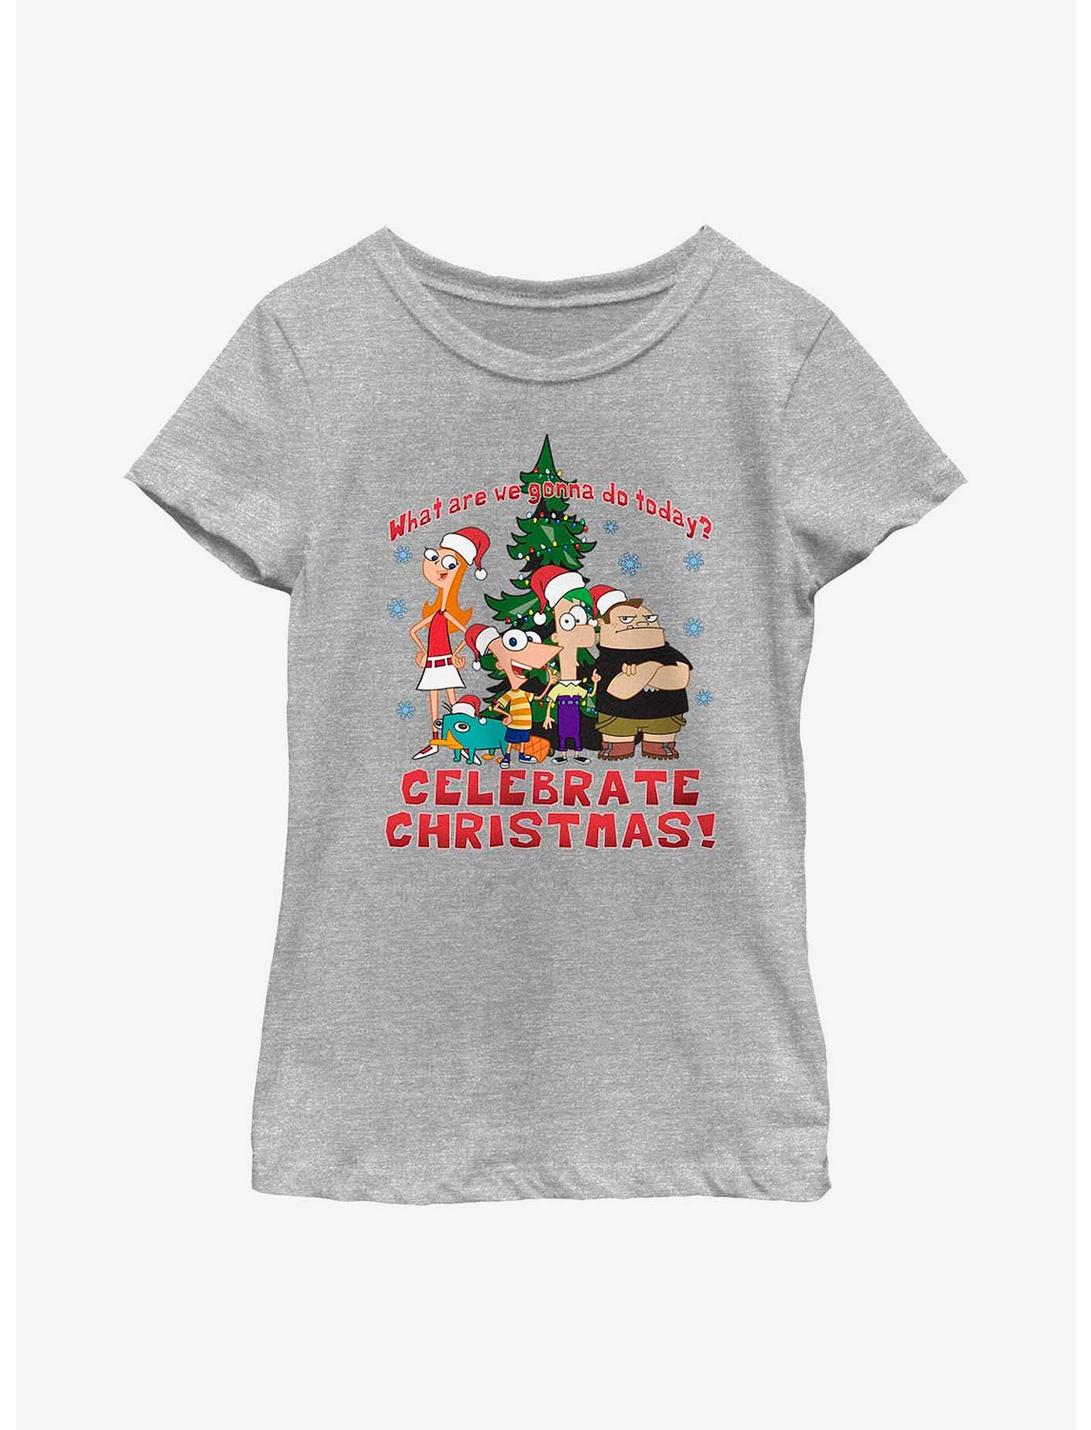 Disney Phineas And Ferb Celebrate Christmas Youth Girls T-Shirt, ATH HTR, hi-res